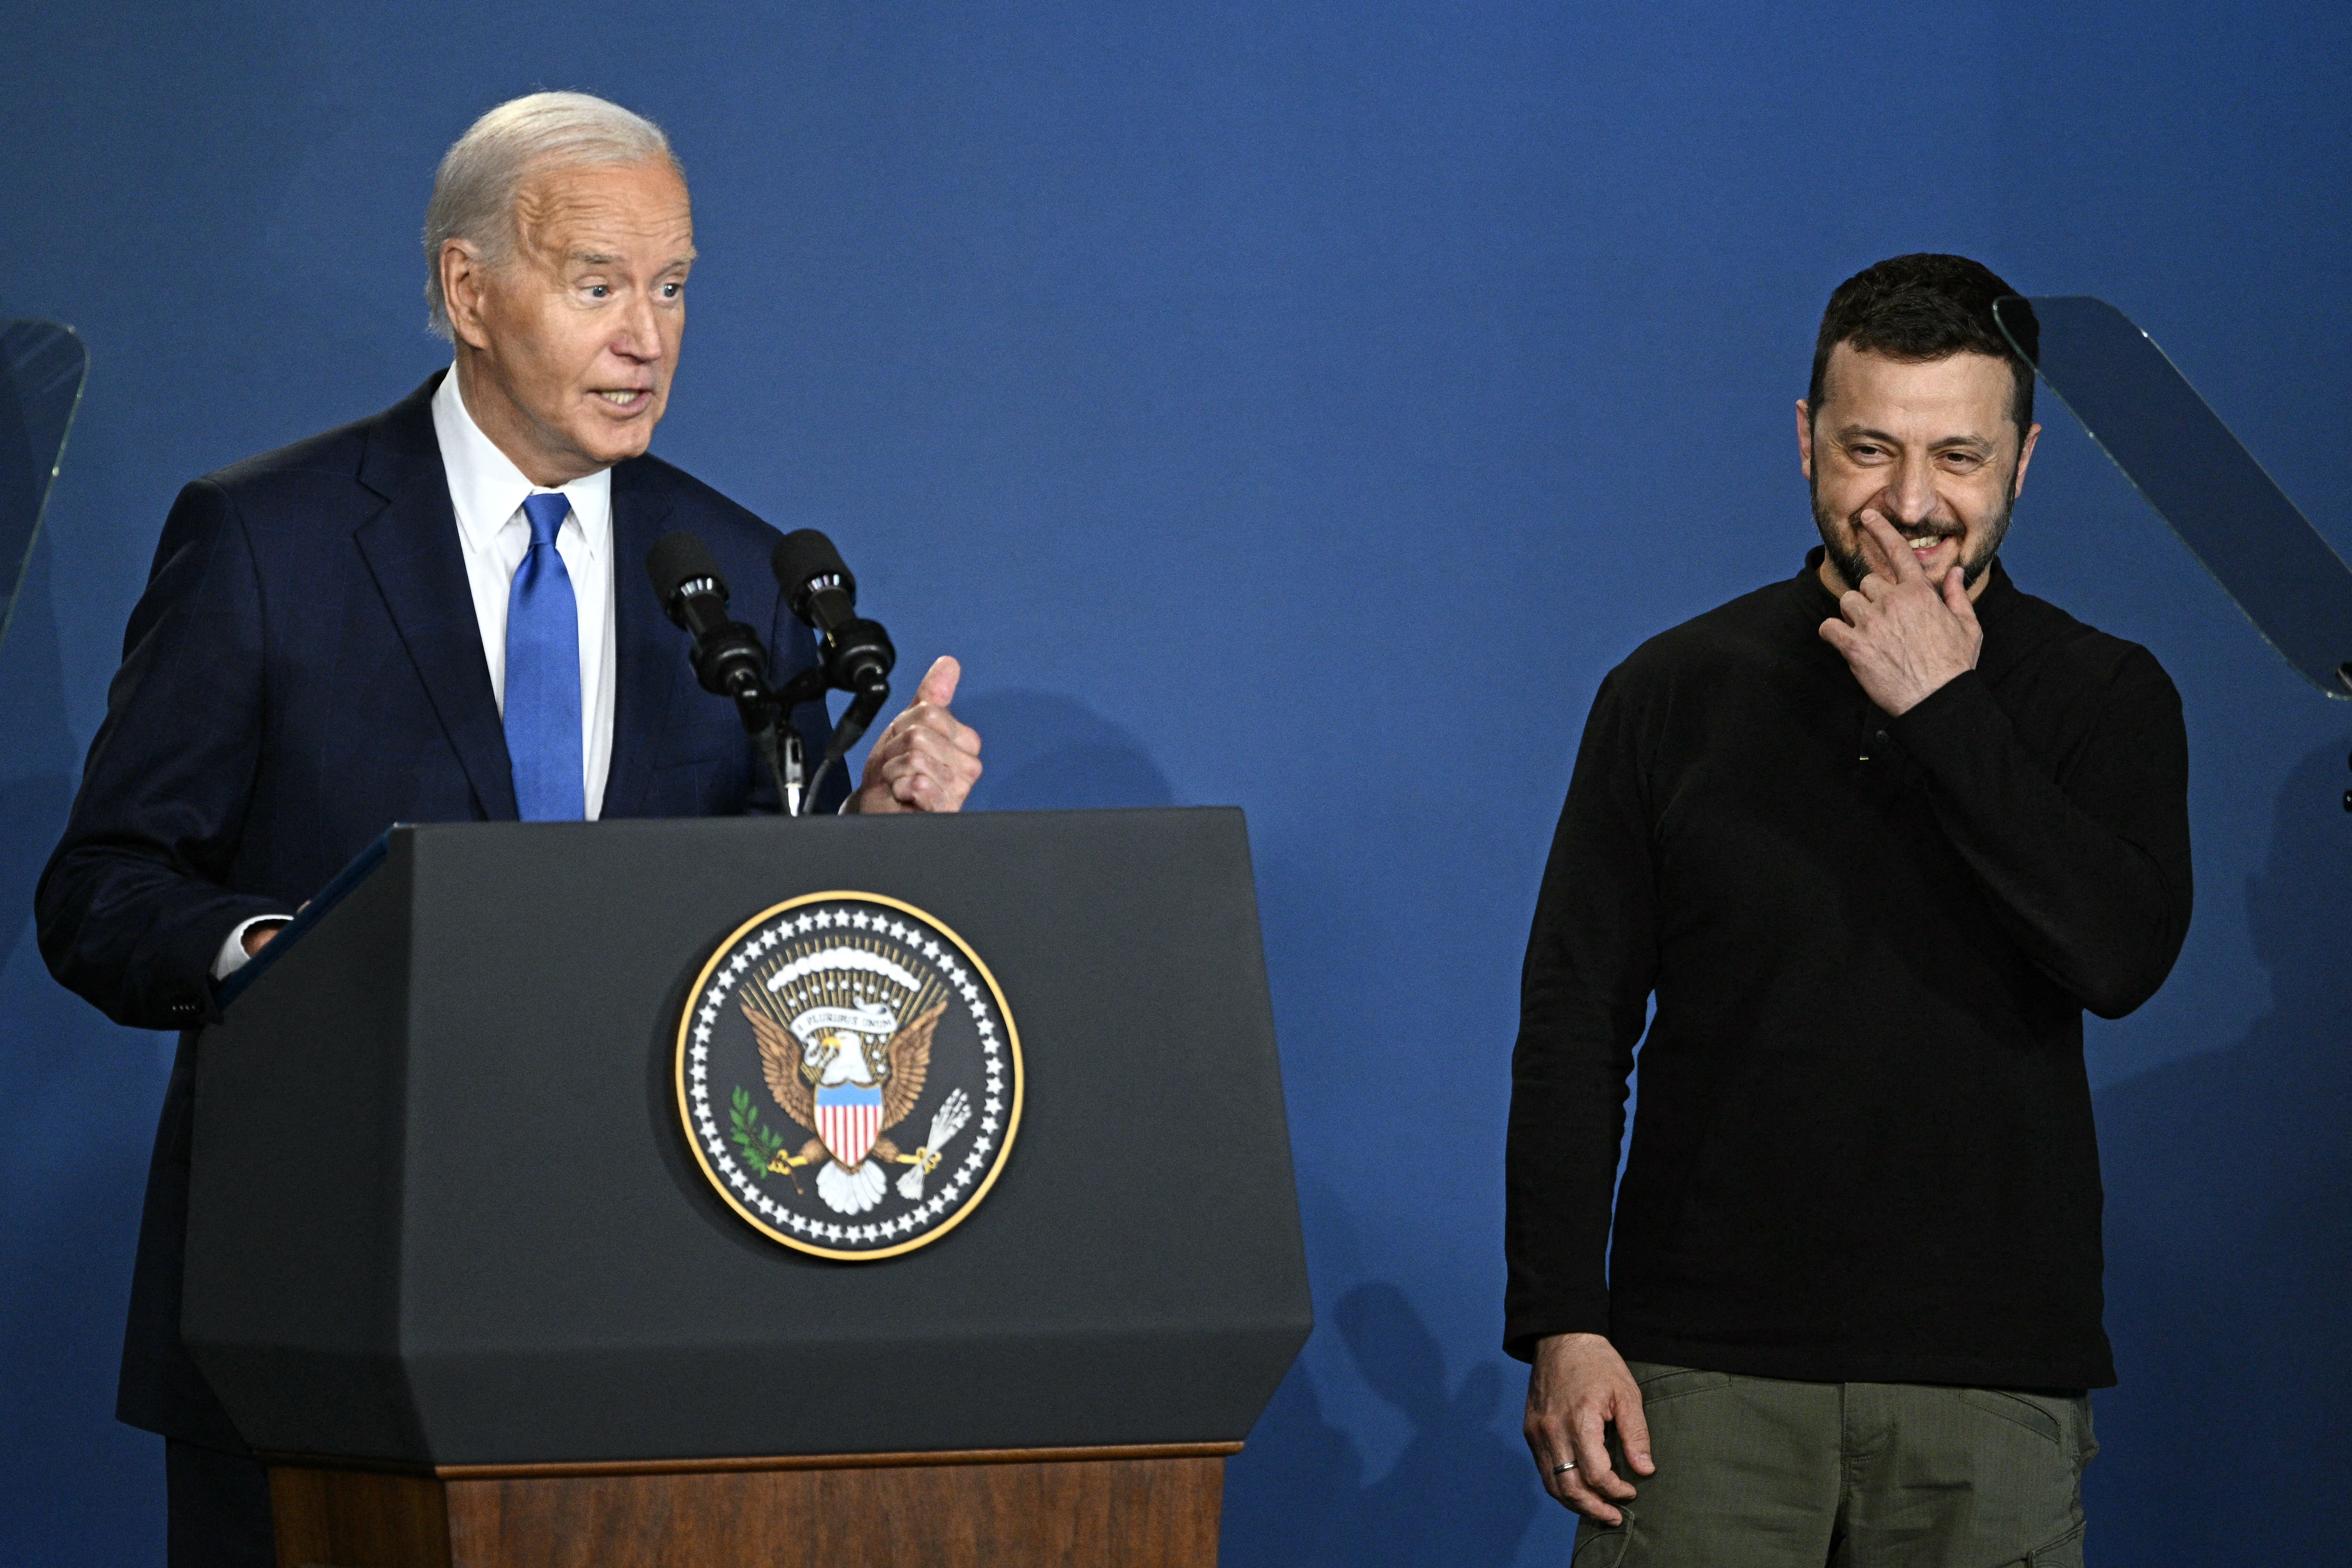 Joe Biden praised Ukraine's Volodymyr Zelensky but moments later referred to him as ‘president Putin’ on July 11 at a Nato summit event